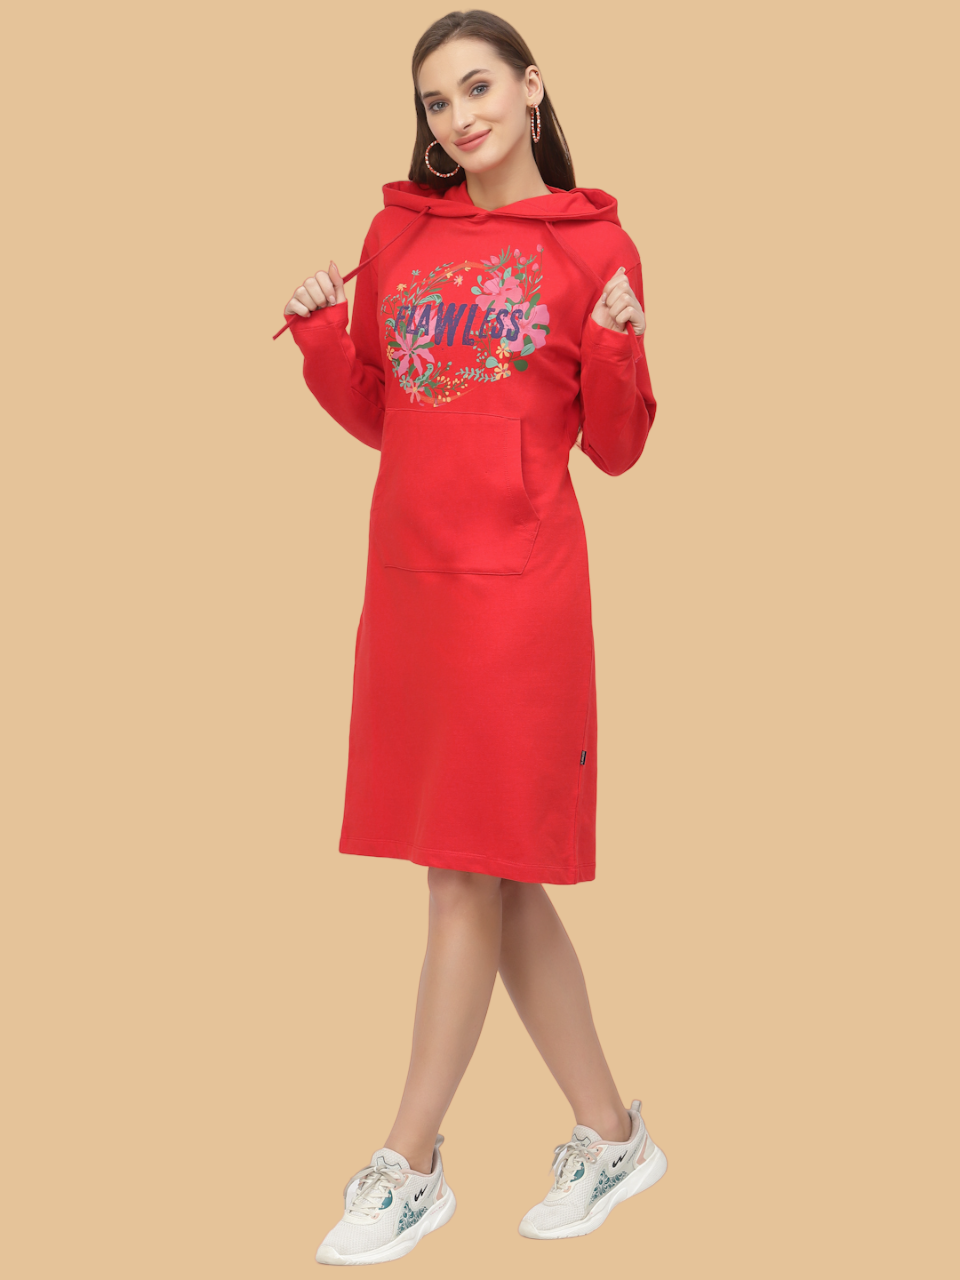 Flawless Women's Red Hooded Dress For Winter Being Flawless